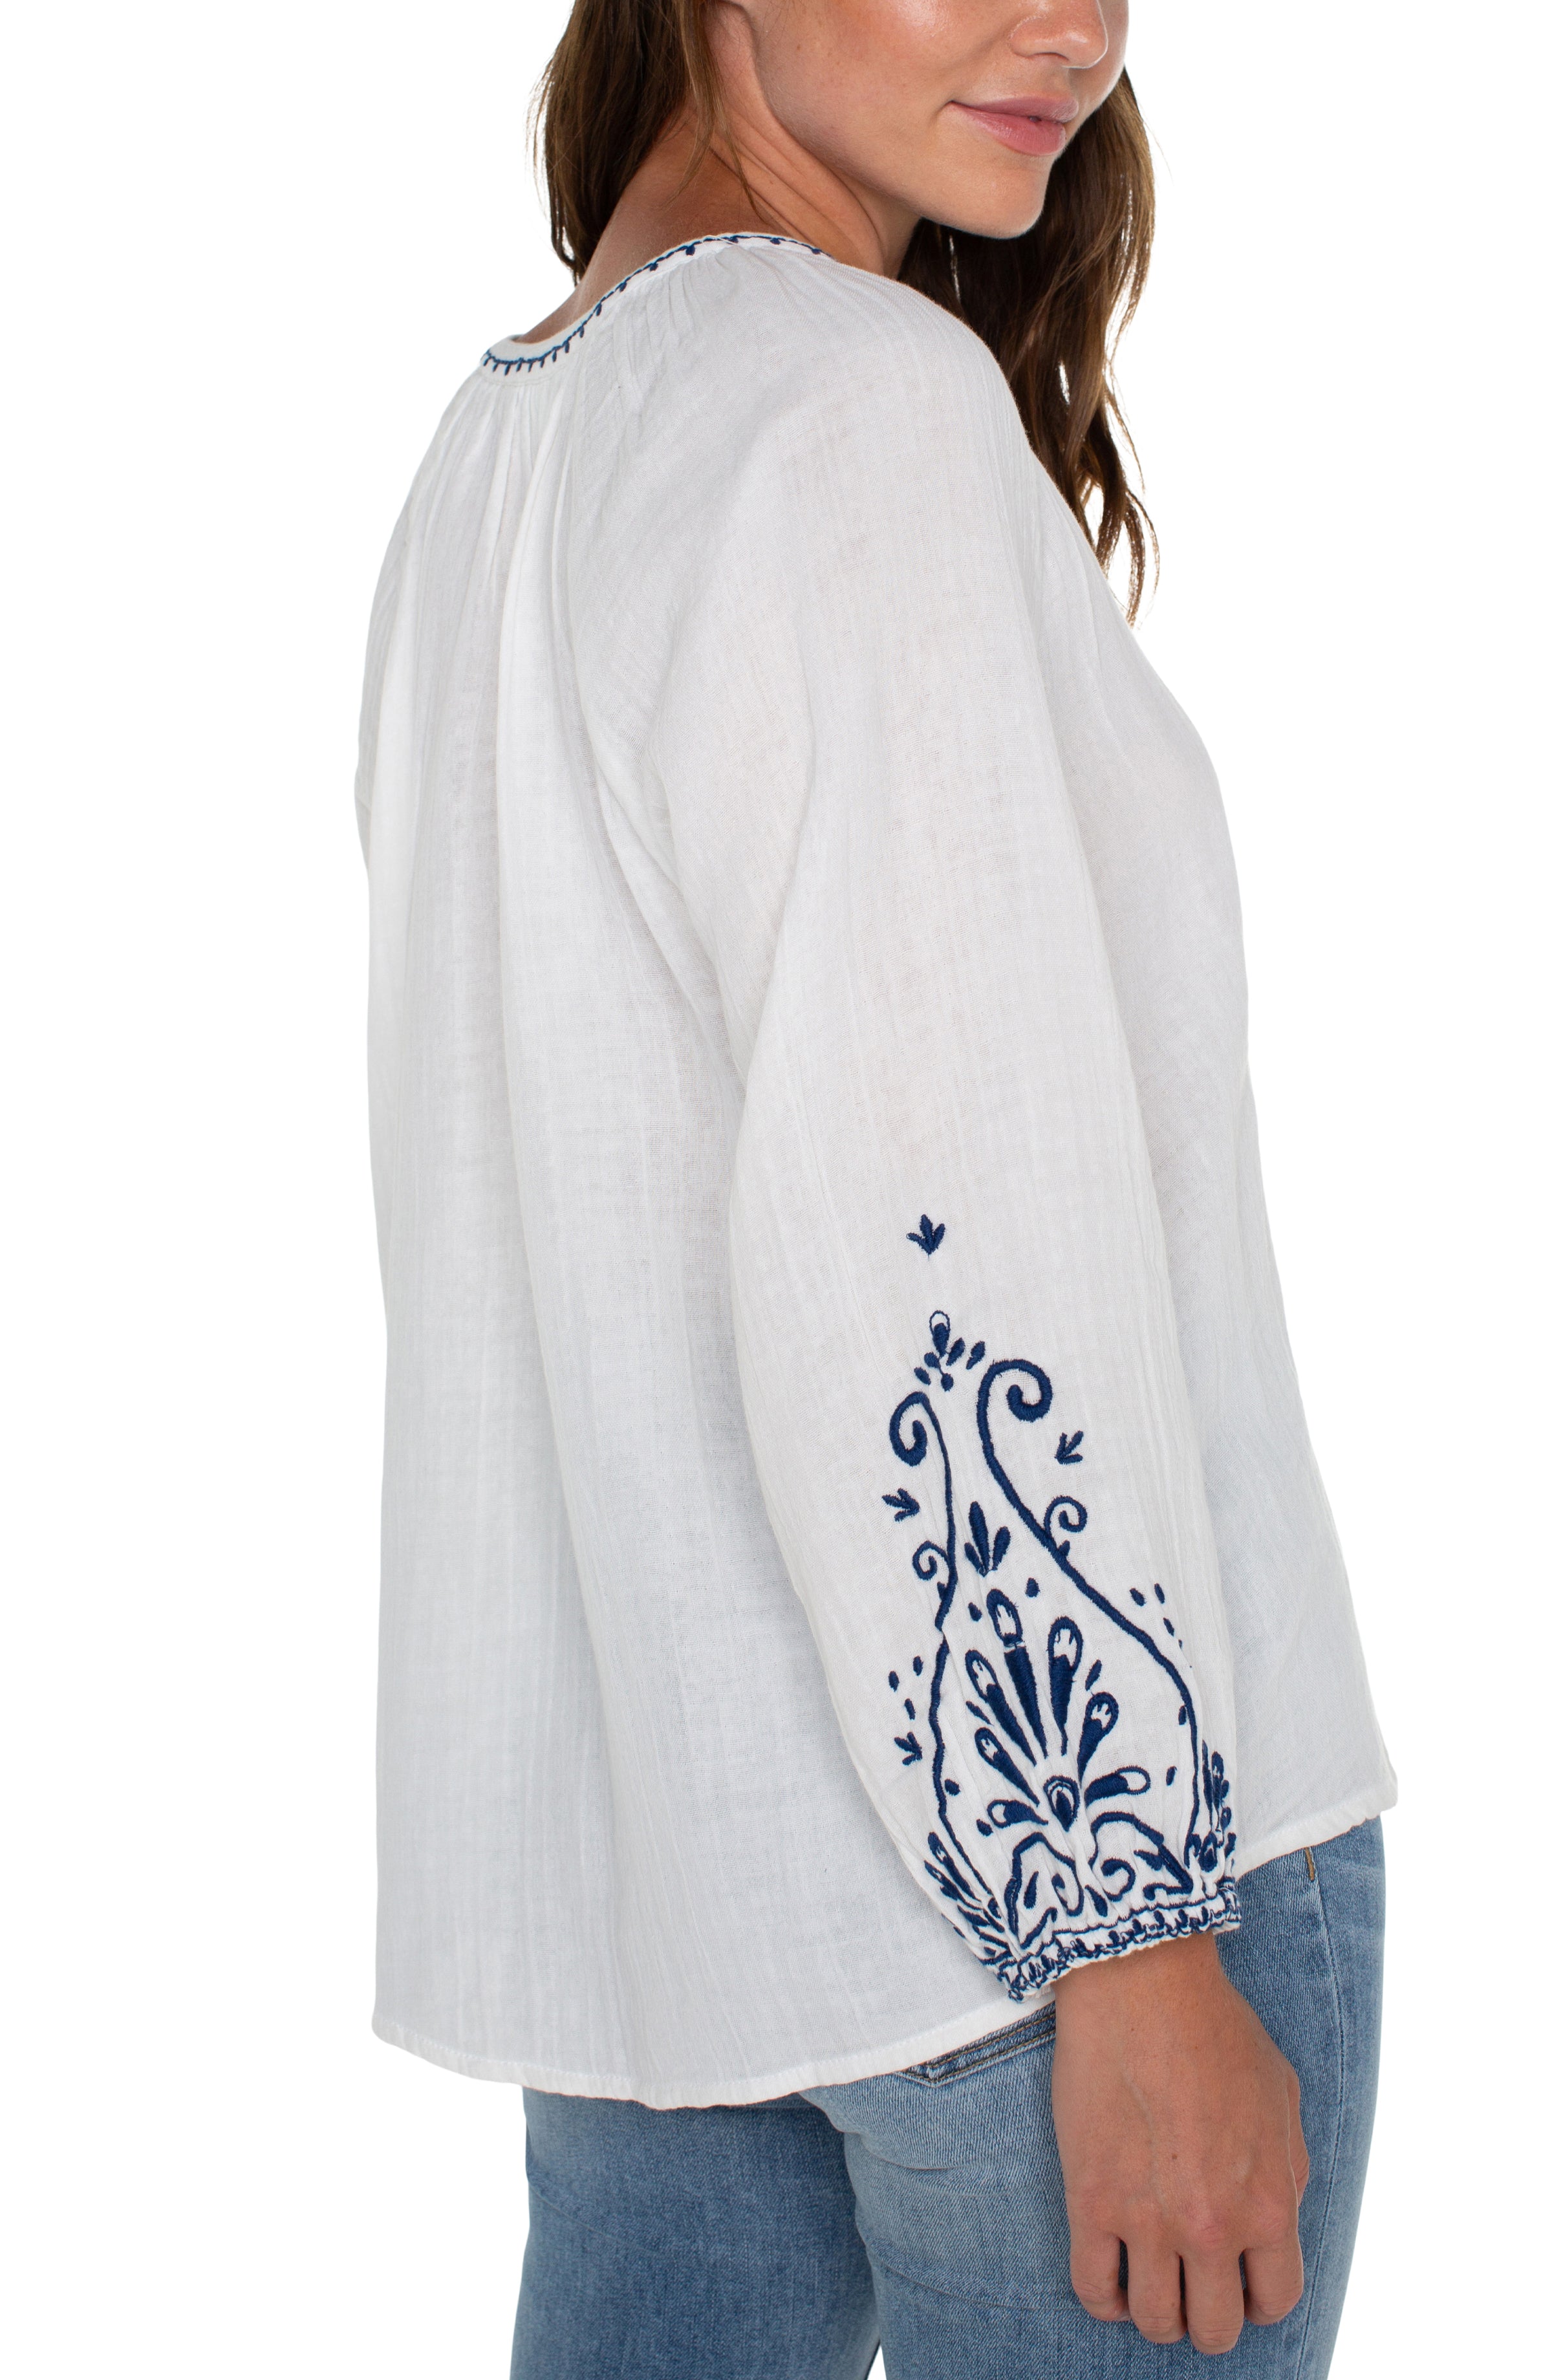 LPLA Embroidered Blouse